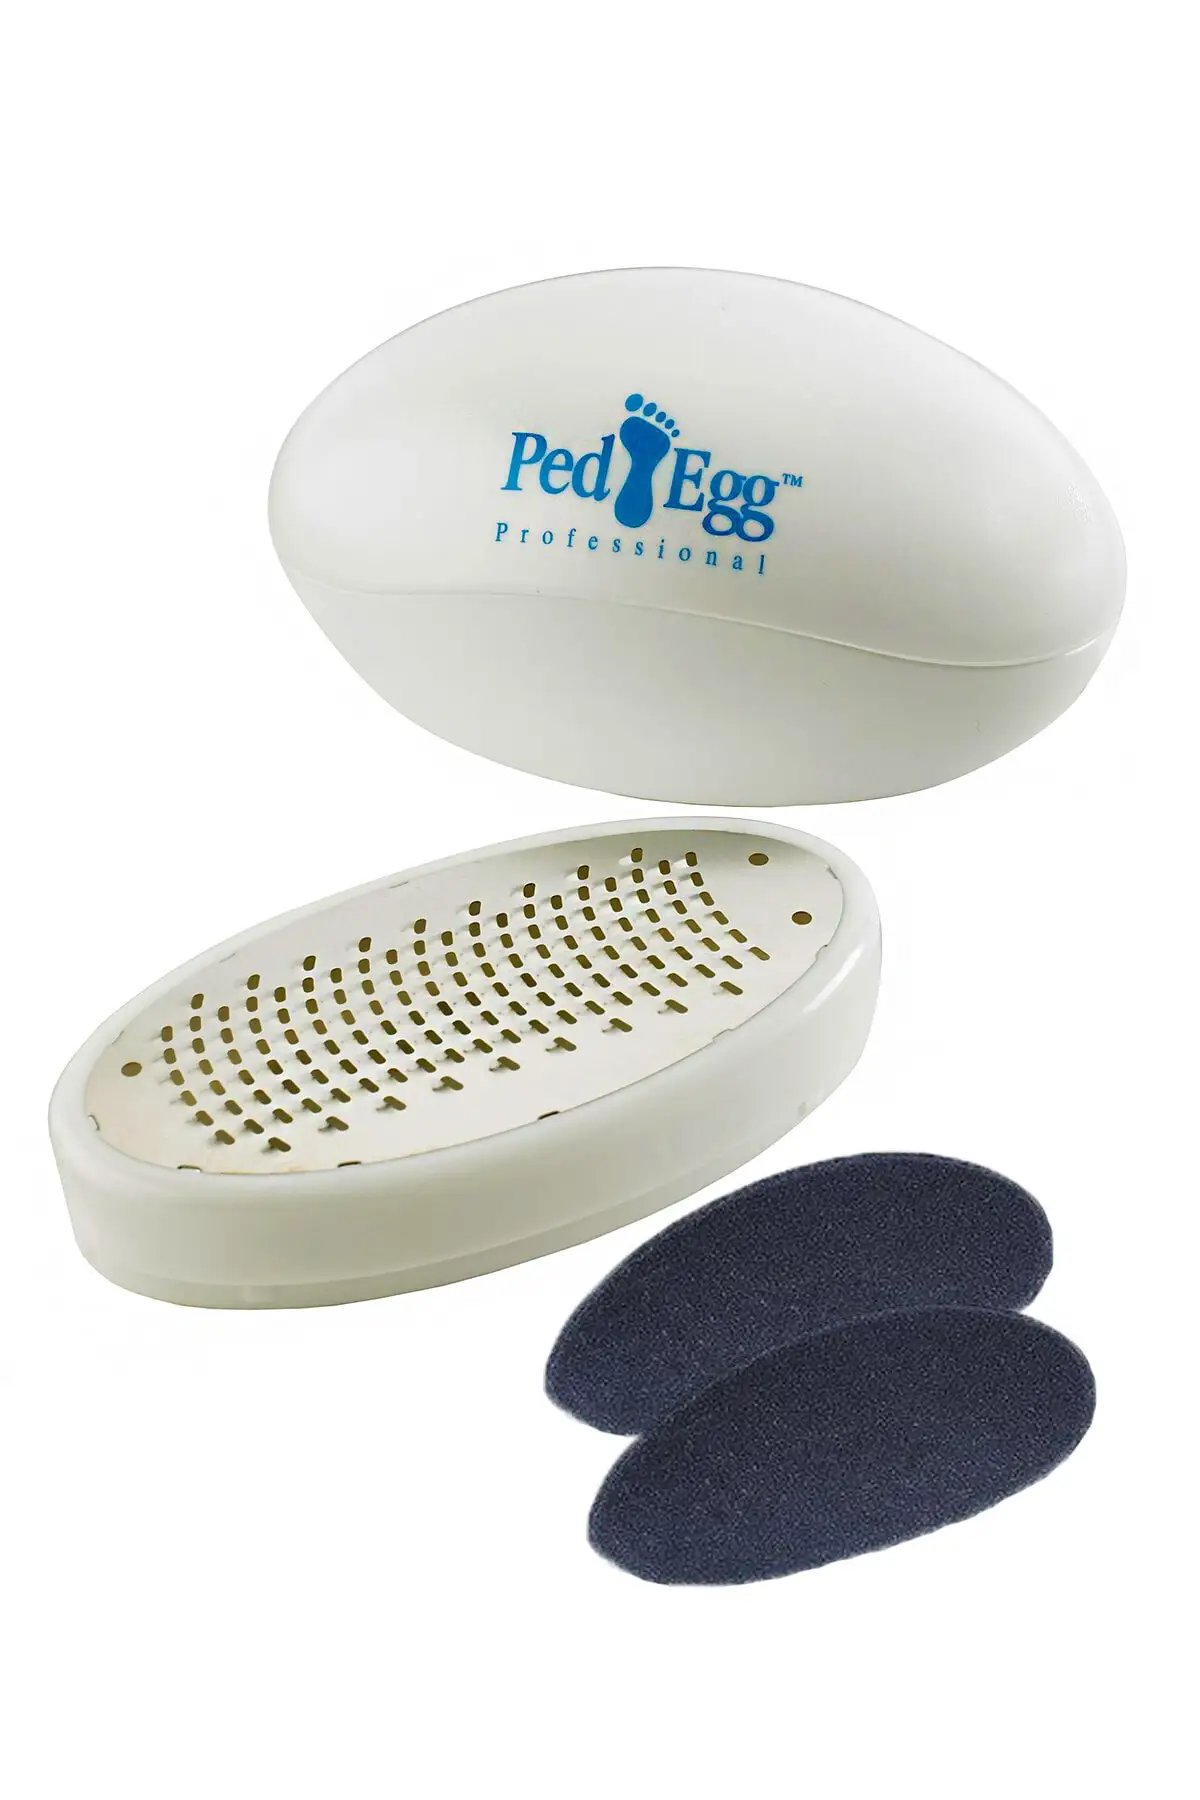 As Seen on TV - Ped Egg Pro Pedicure Foot File